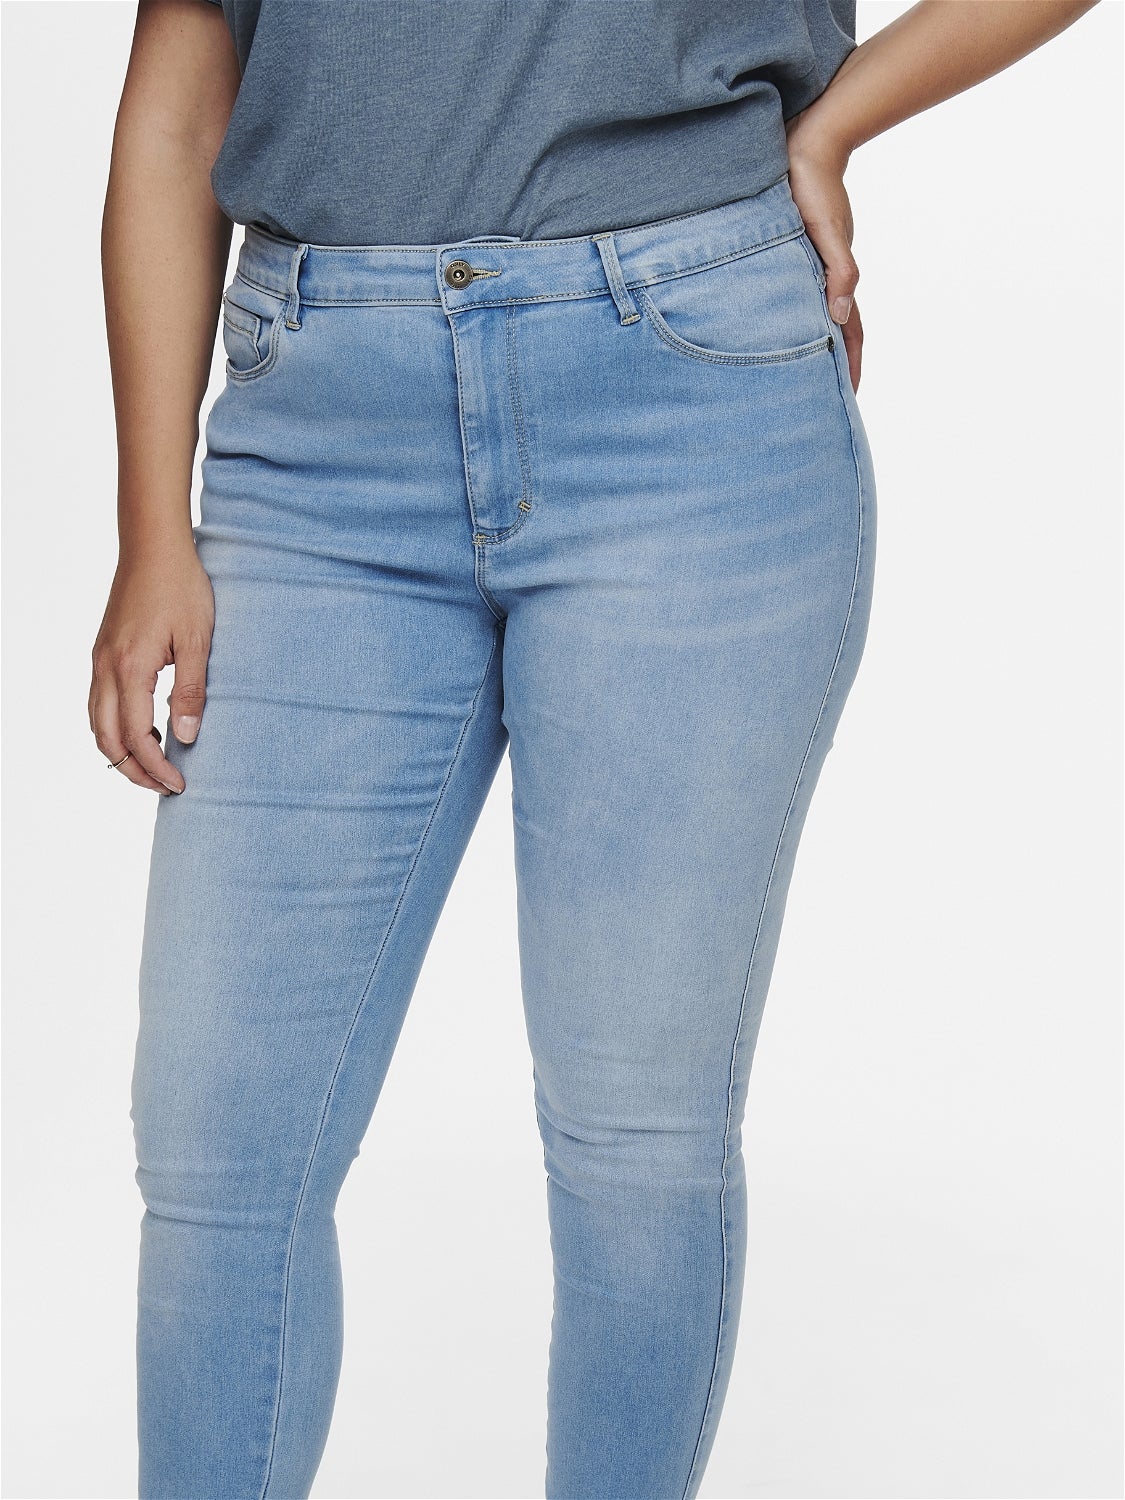 jeans fit Blue hw | Skinny | ONLY® Light Curvy CarAugusta